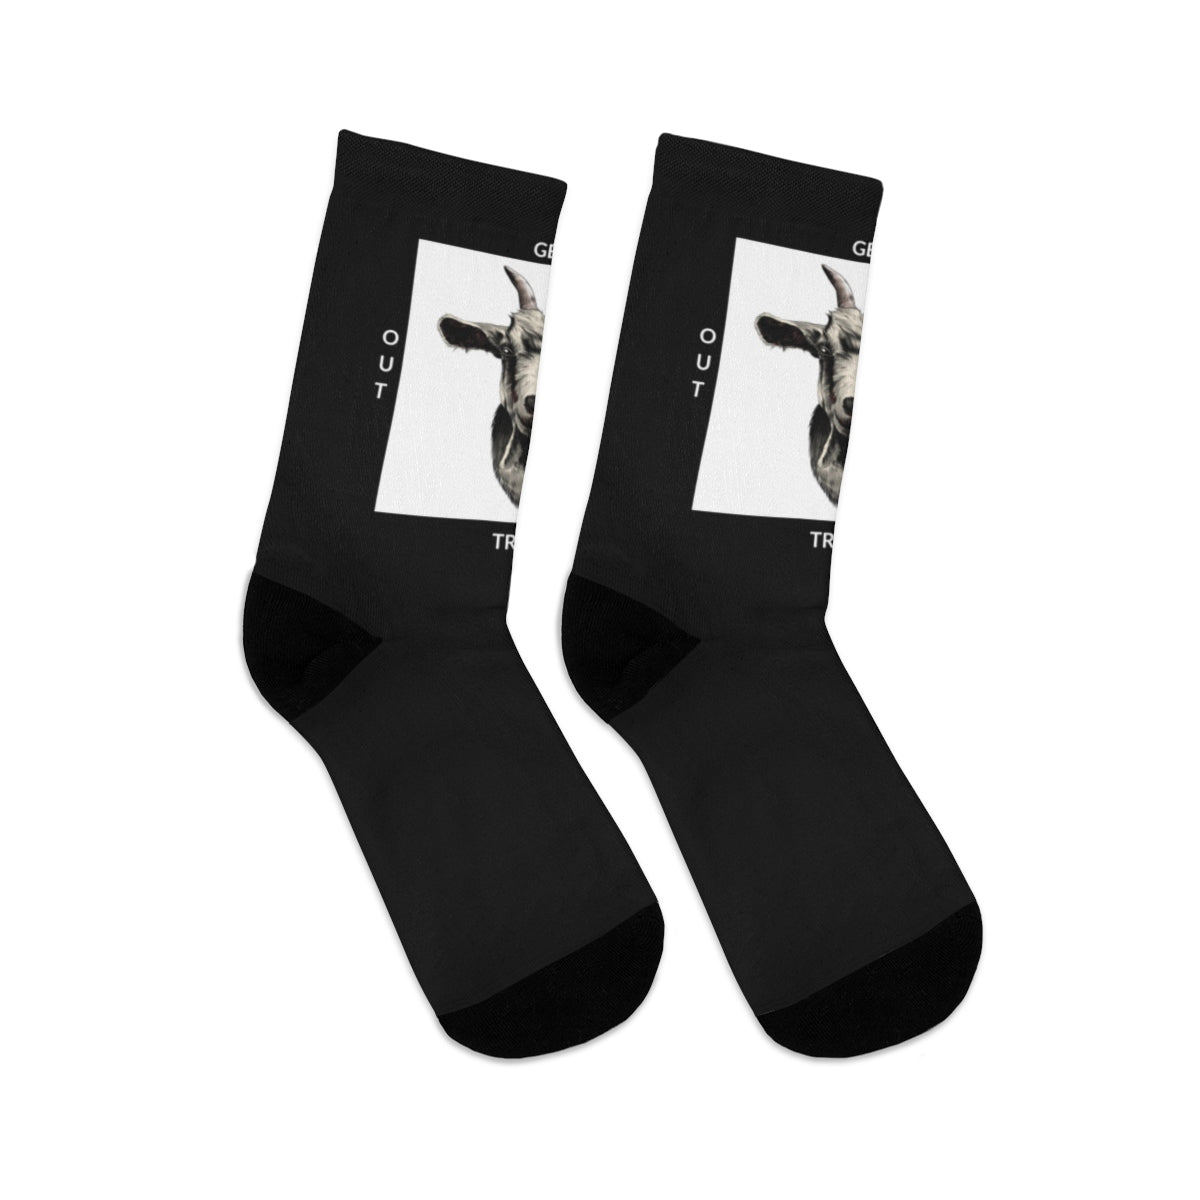 Five Toes Down G.O.A.T (Get out and try) Socks